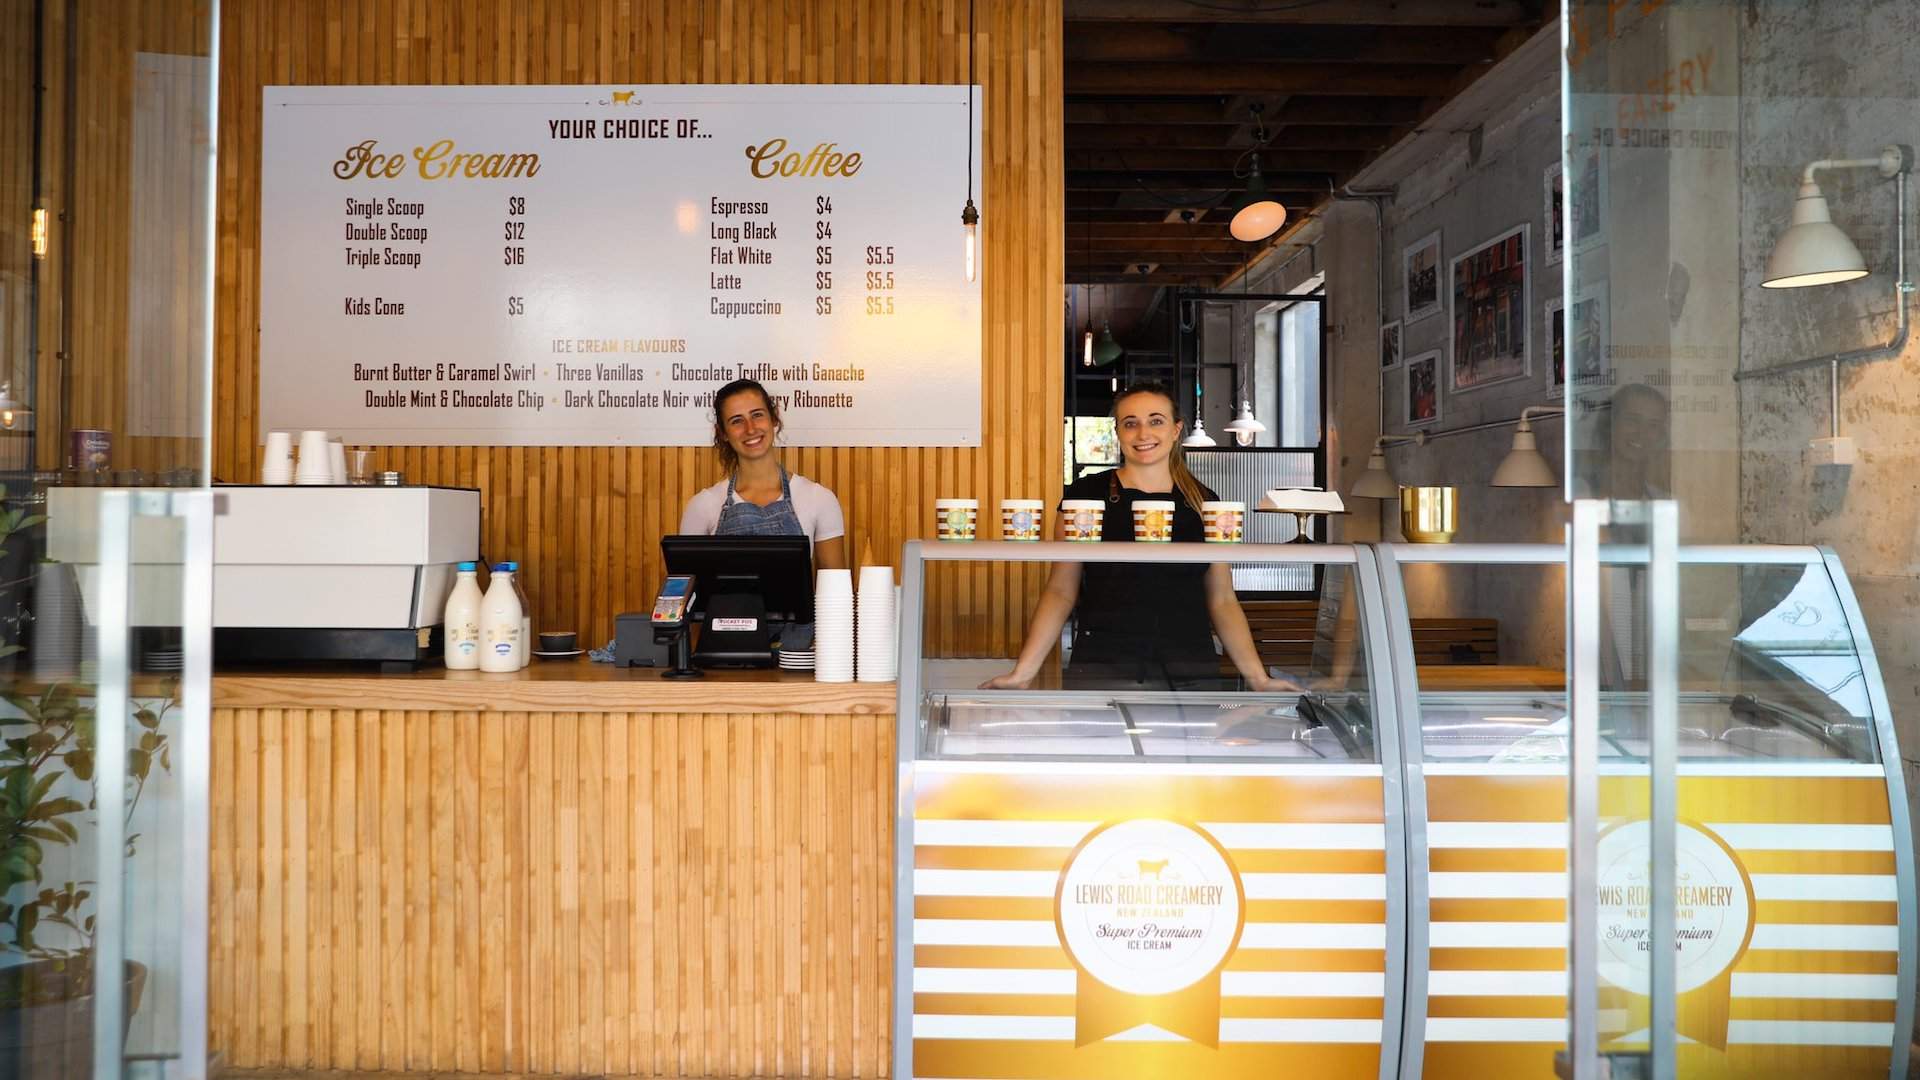 Takapuna Is Now Home to a Lewis Road Creamery Scoop Shop